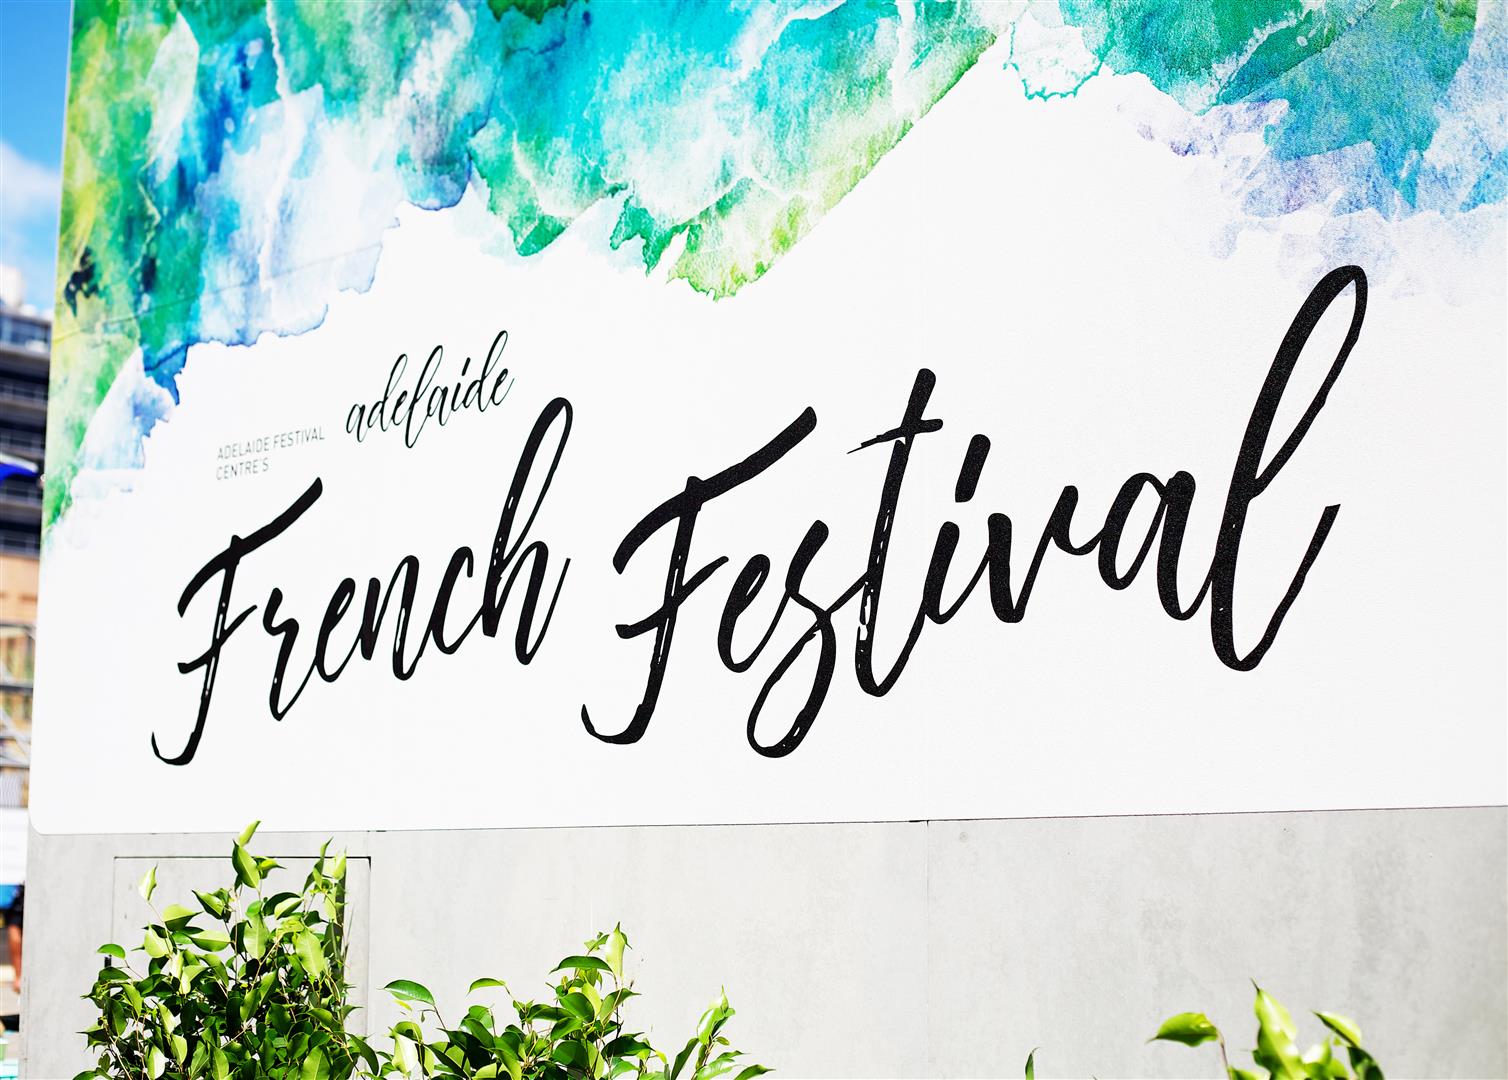 Masterclasses sold out at Adelaide French Festival